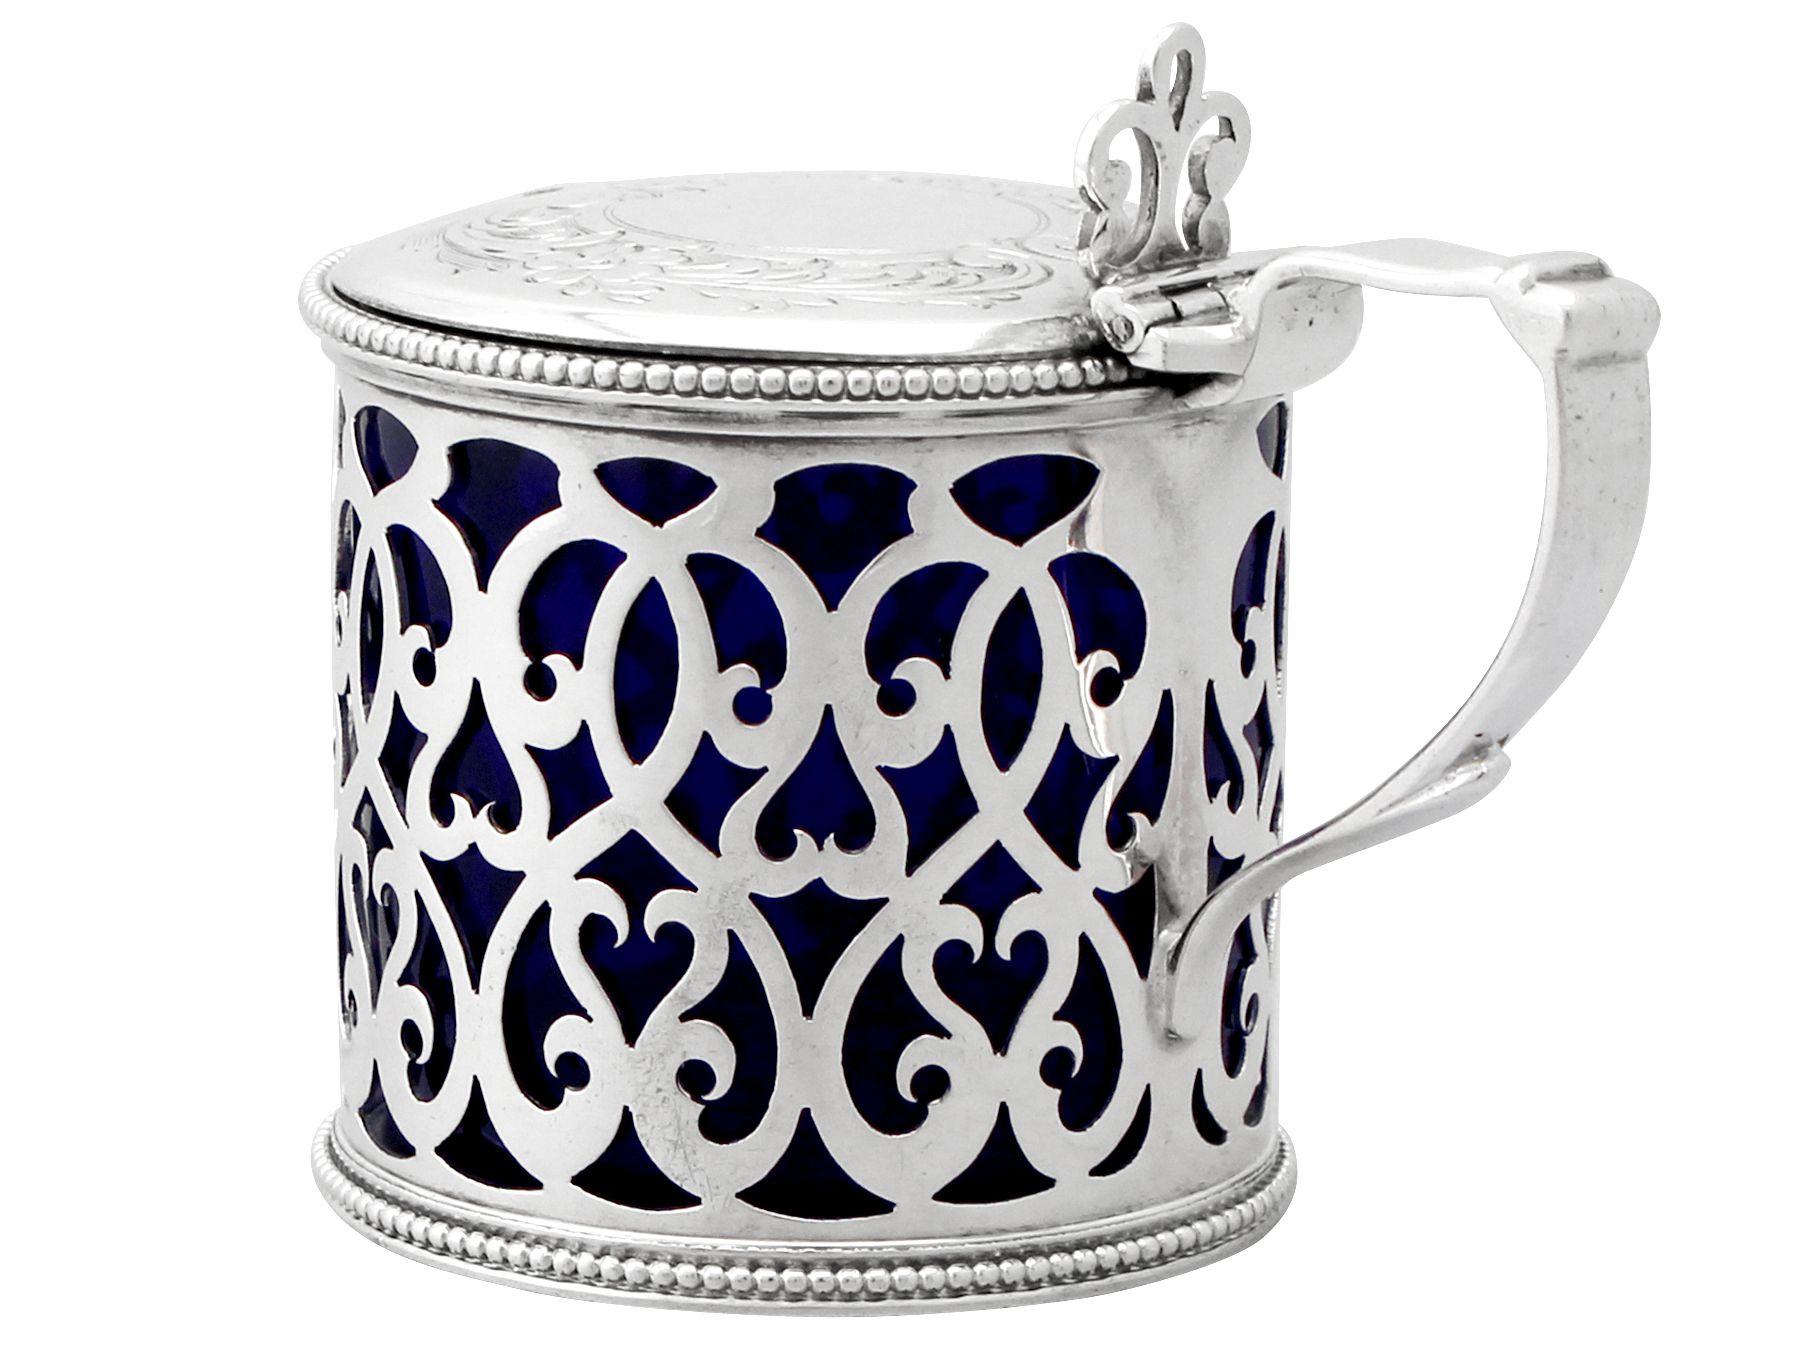 Antique Victorian Sterling Silver Mustard Pot In Excellent Condition For Sale In Jesmond, Newcastle Upon Tyne